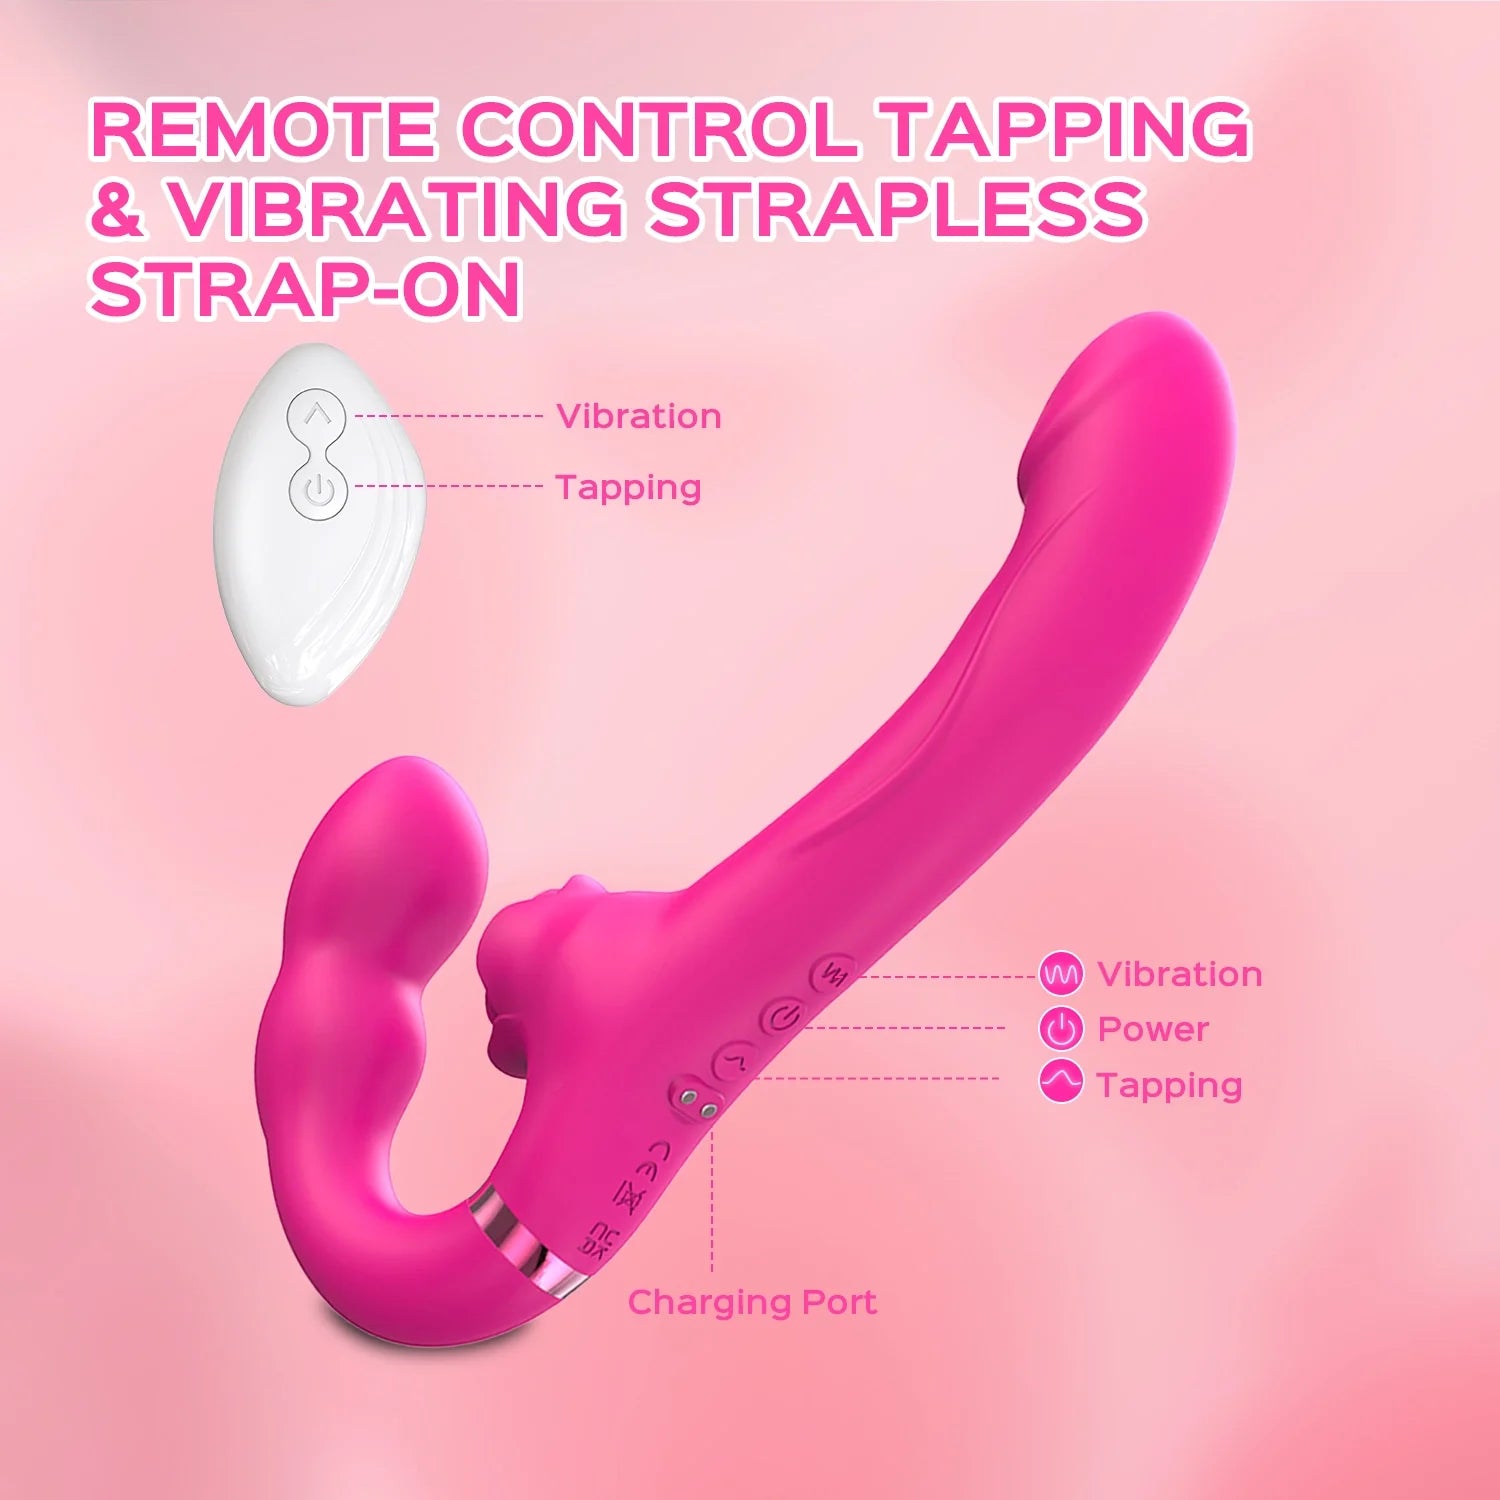 Bloom - Remote Control Tapping & Vibrating Strapless Strap-On